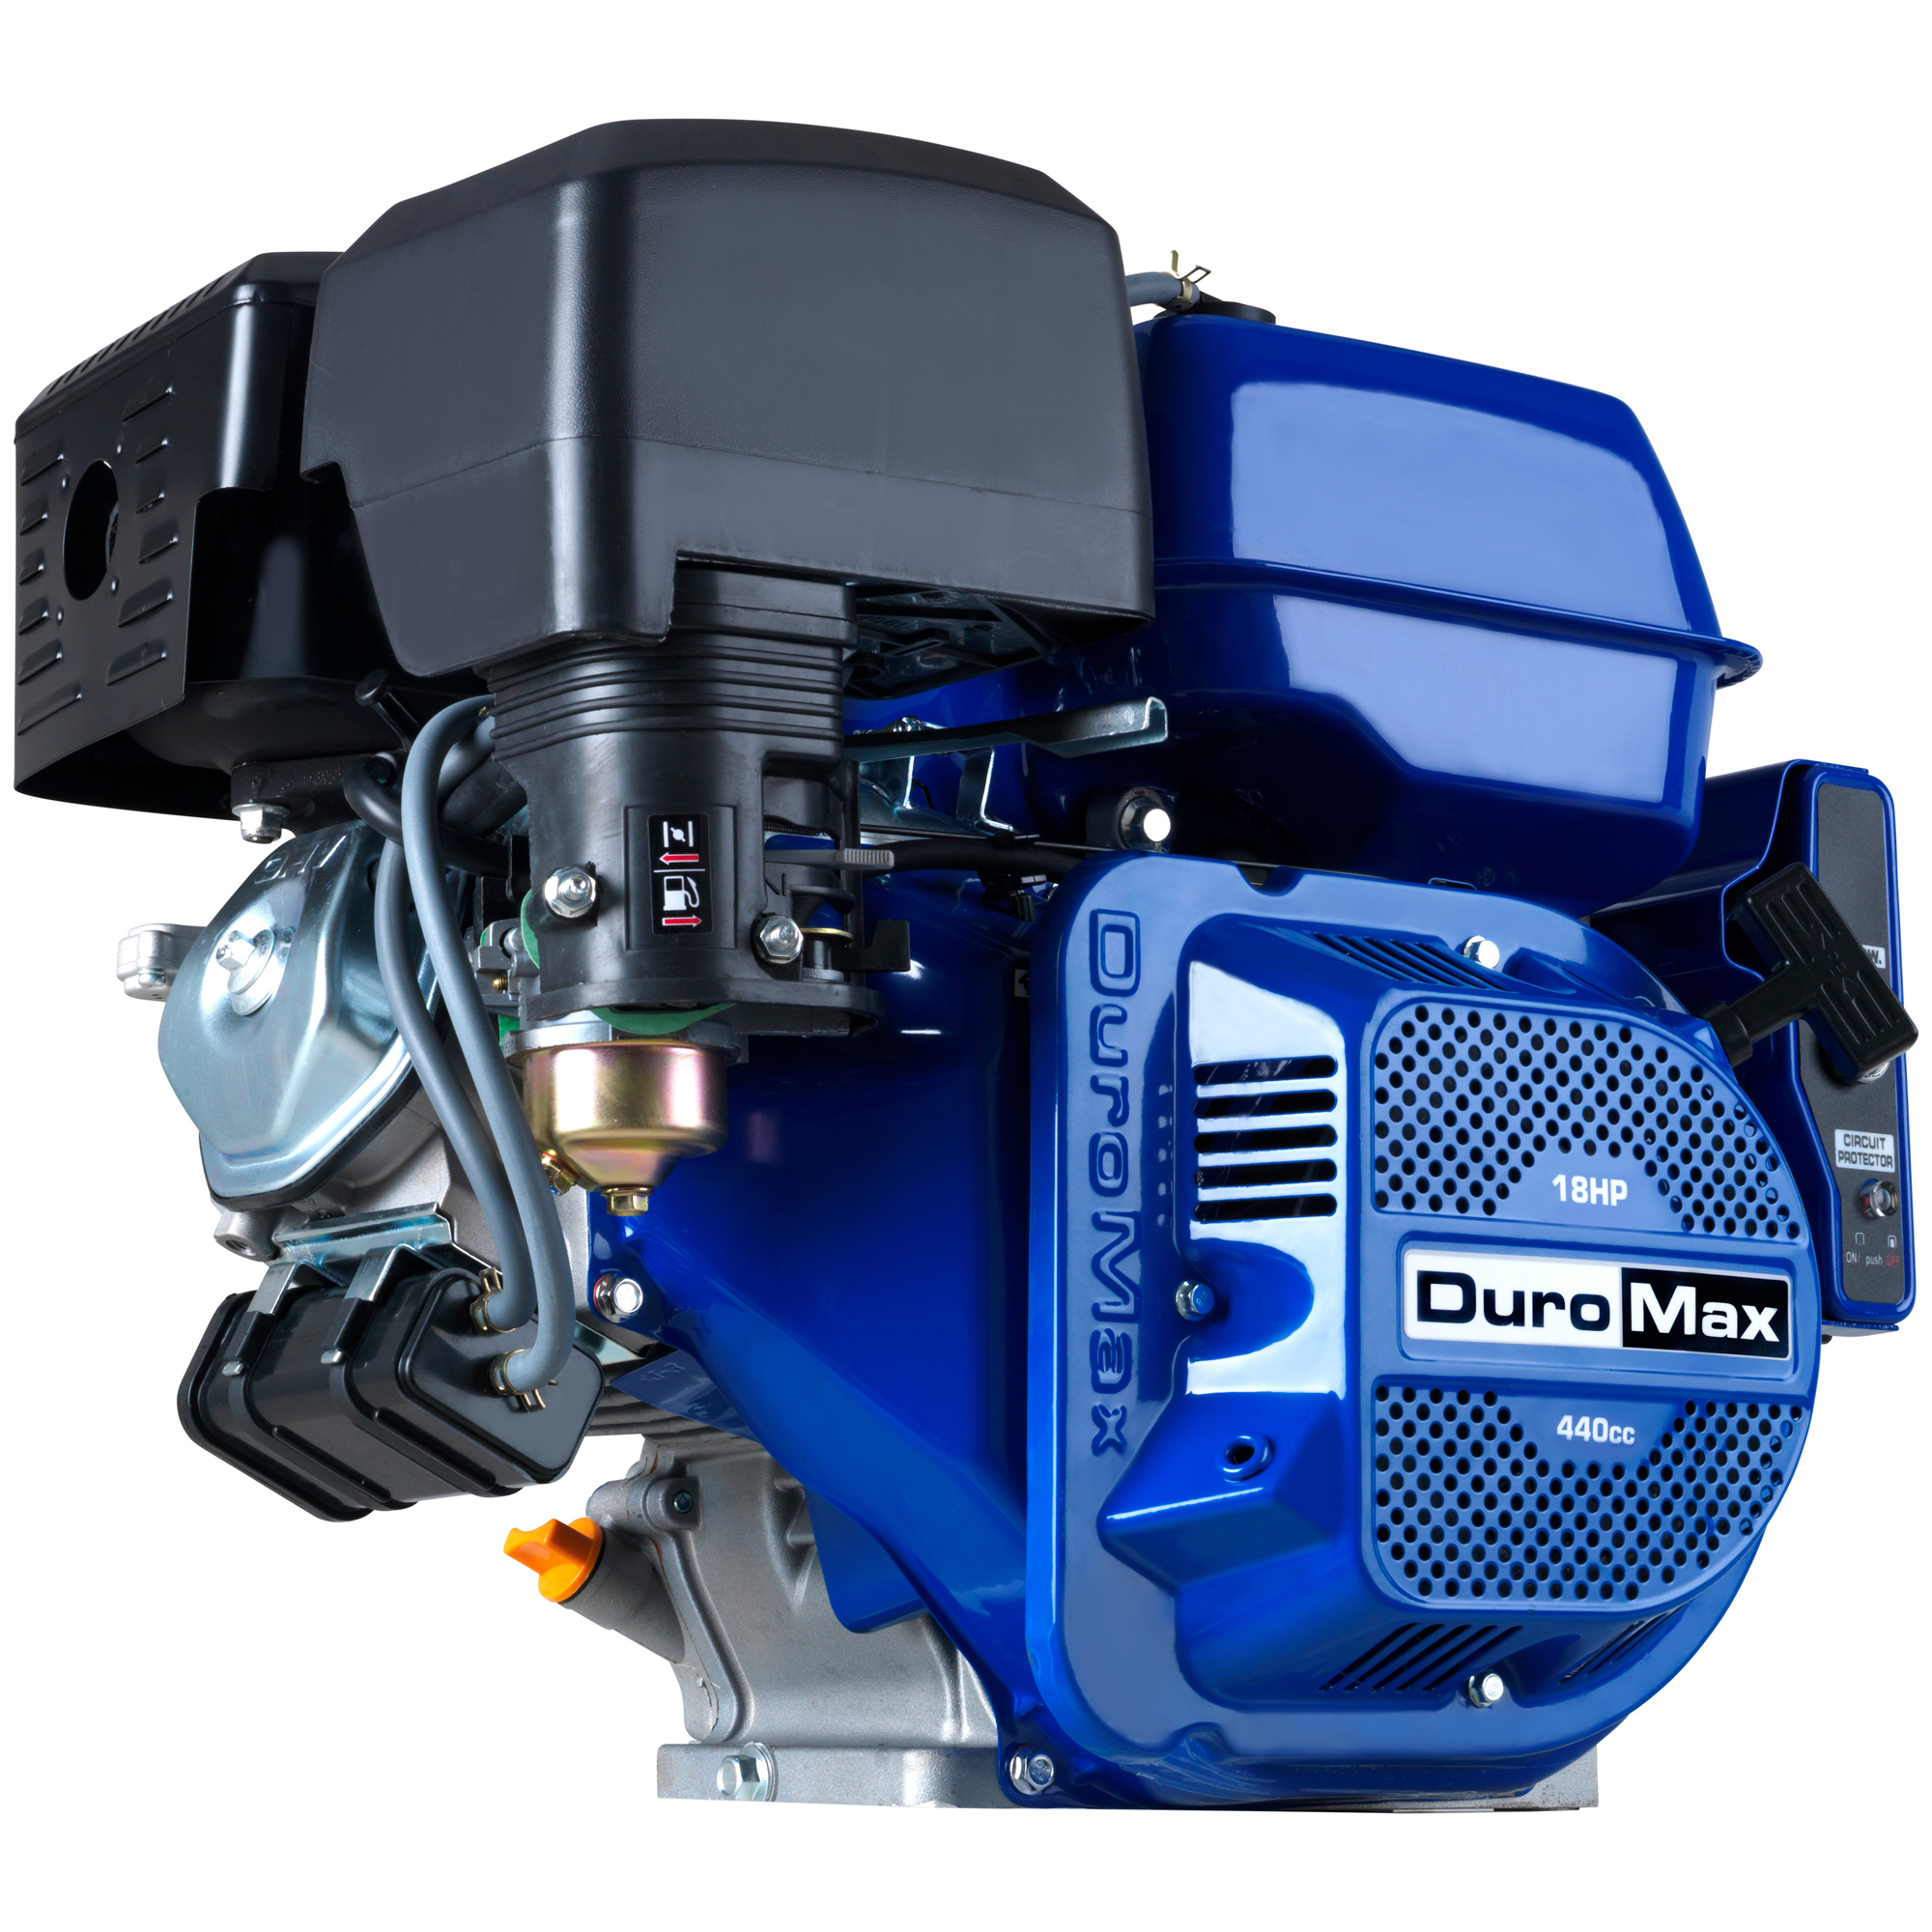 DuroMax, 18-HP 440cc Electric Start Engine, Engine Displacement 440 cc, Engine Type Gasoline Engines, Shaft Diameter 1 in, Model XP18HPE